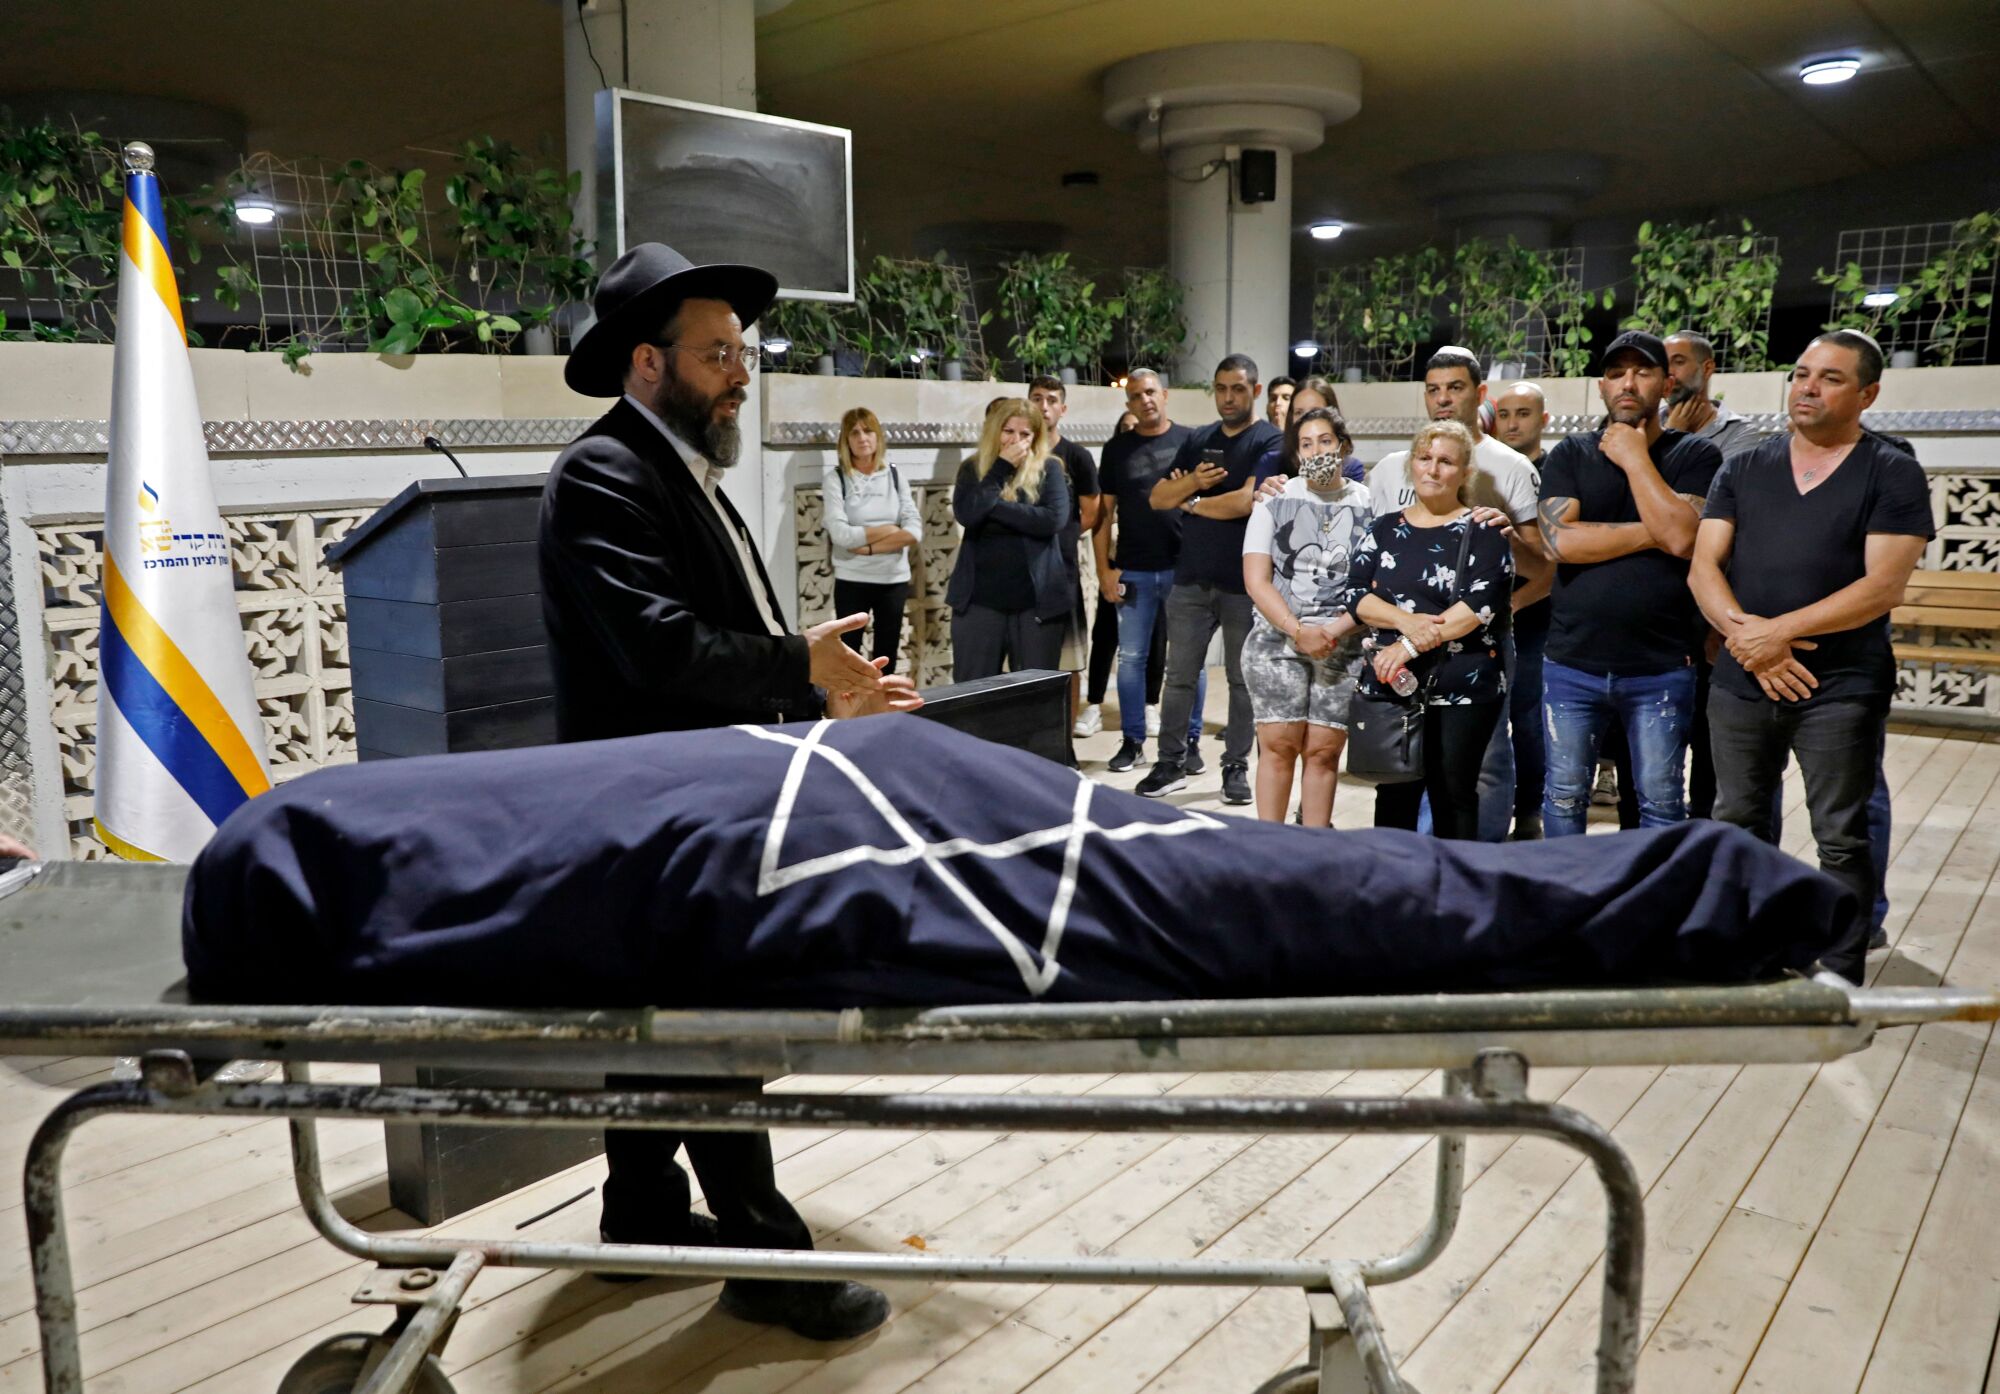 Mourners stand back from a wrapped body while a man stands next to it